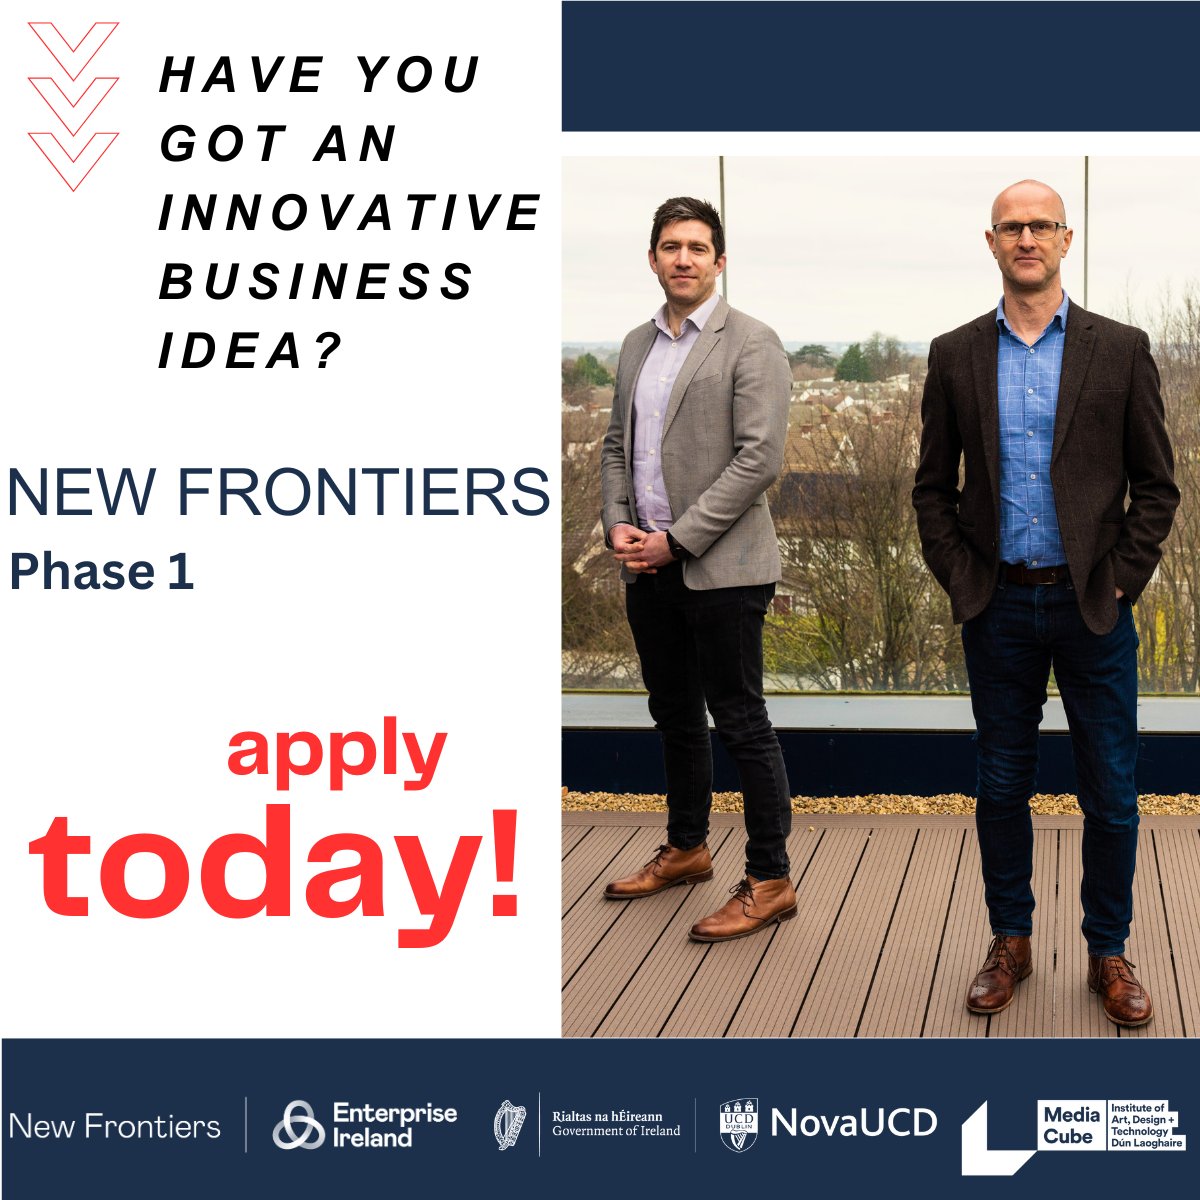 APPLY TODAY! Have you got an innovative business idea? Applications for Phase 1 of the @EI_NewFrontiers Programme at @MediaCubeIADT & @NovaUCD are now open. APPLY HERE: mediacube.ie/services/new-f… DEADLINE: September 3rd #startinireland #globalambition